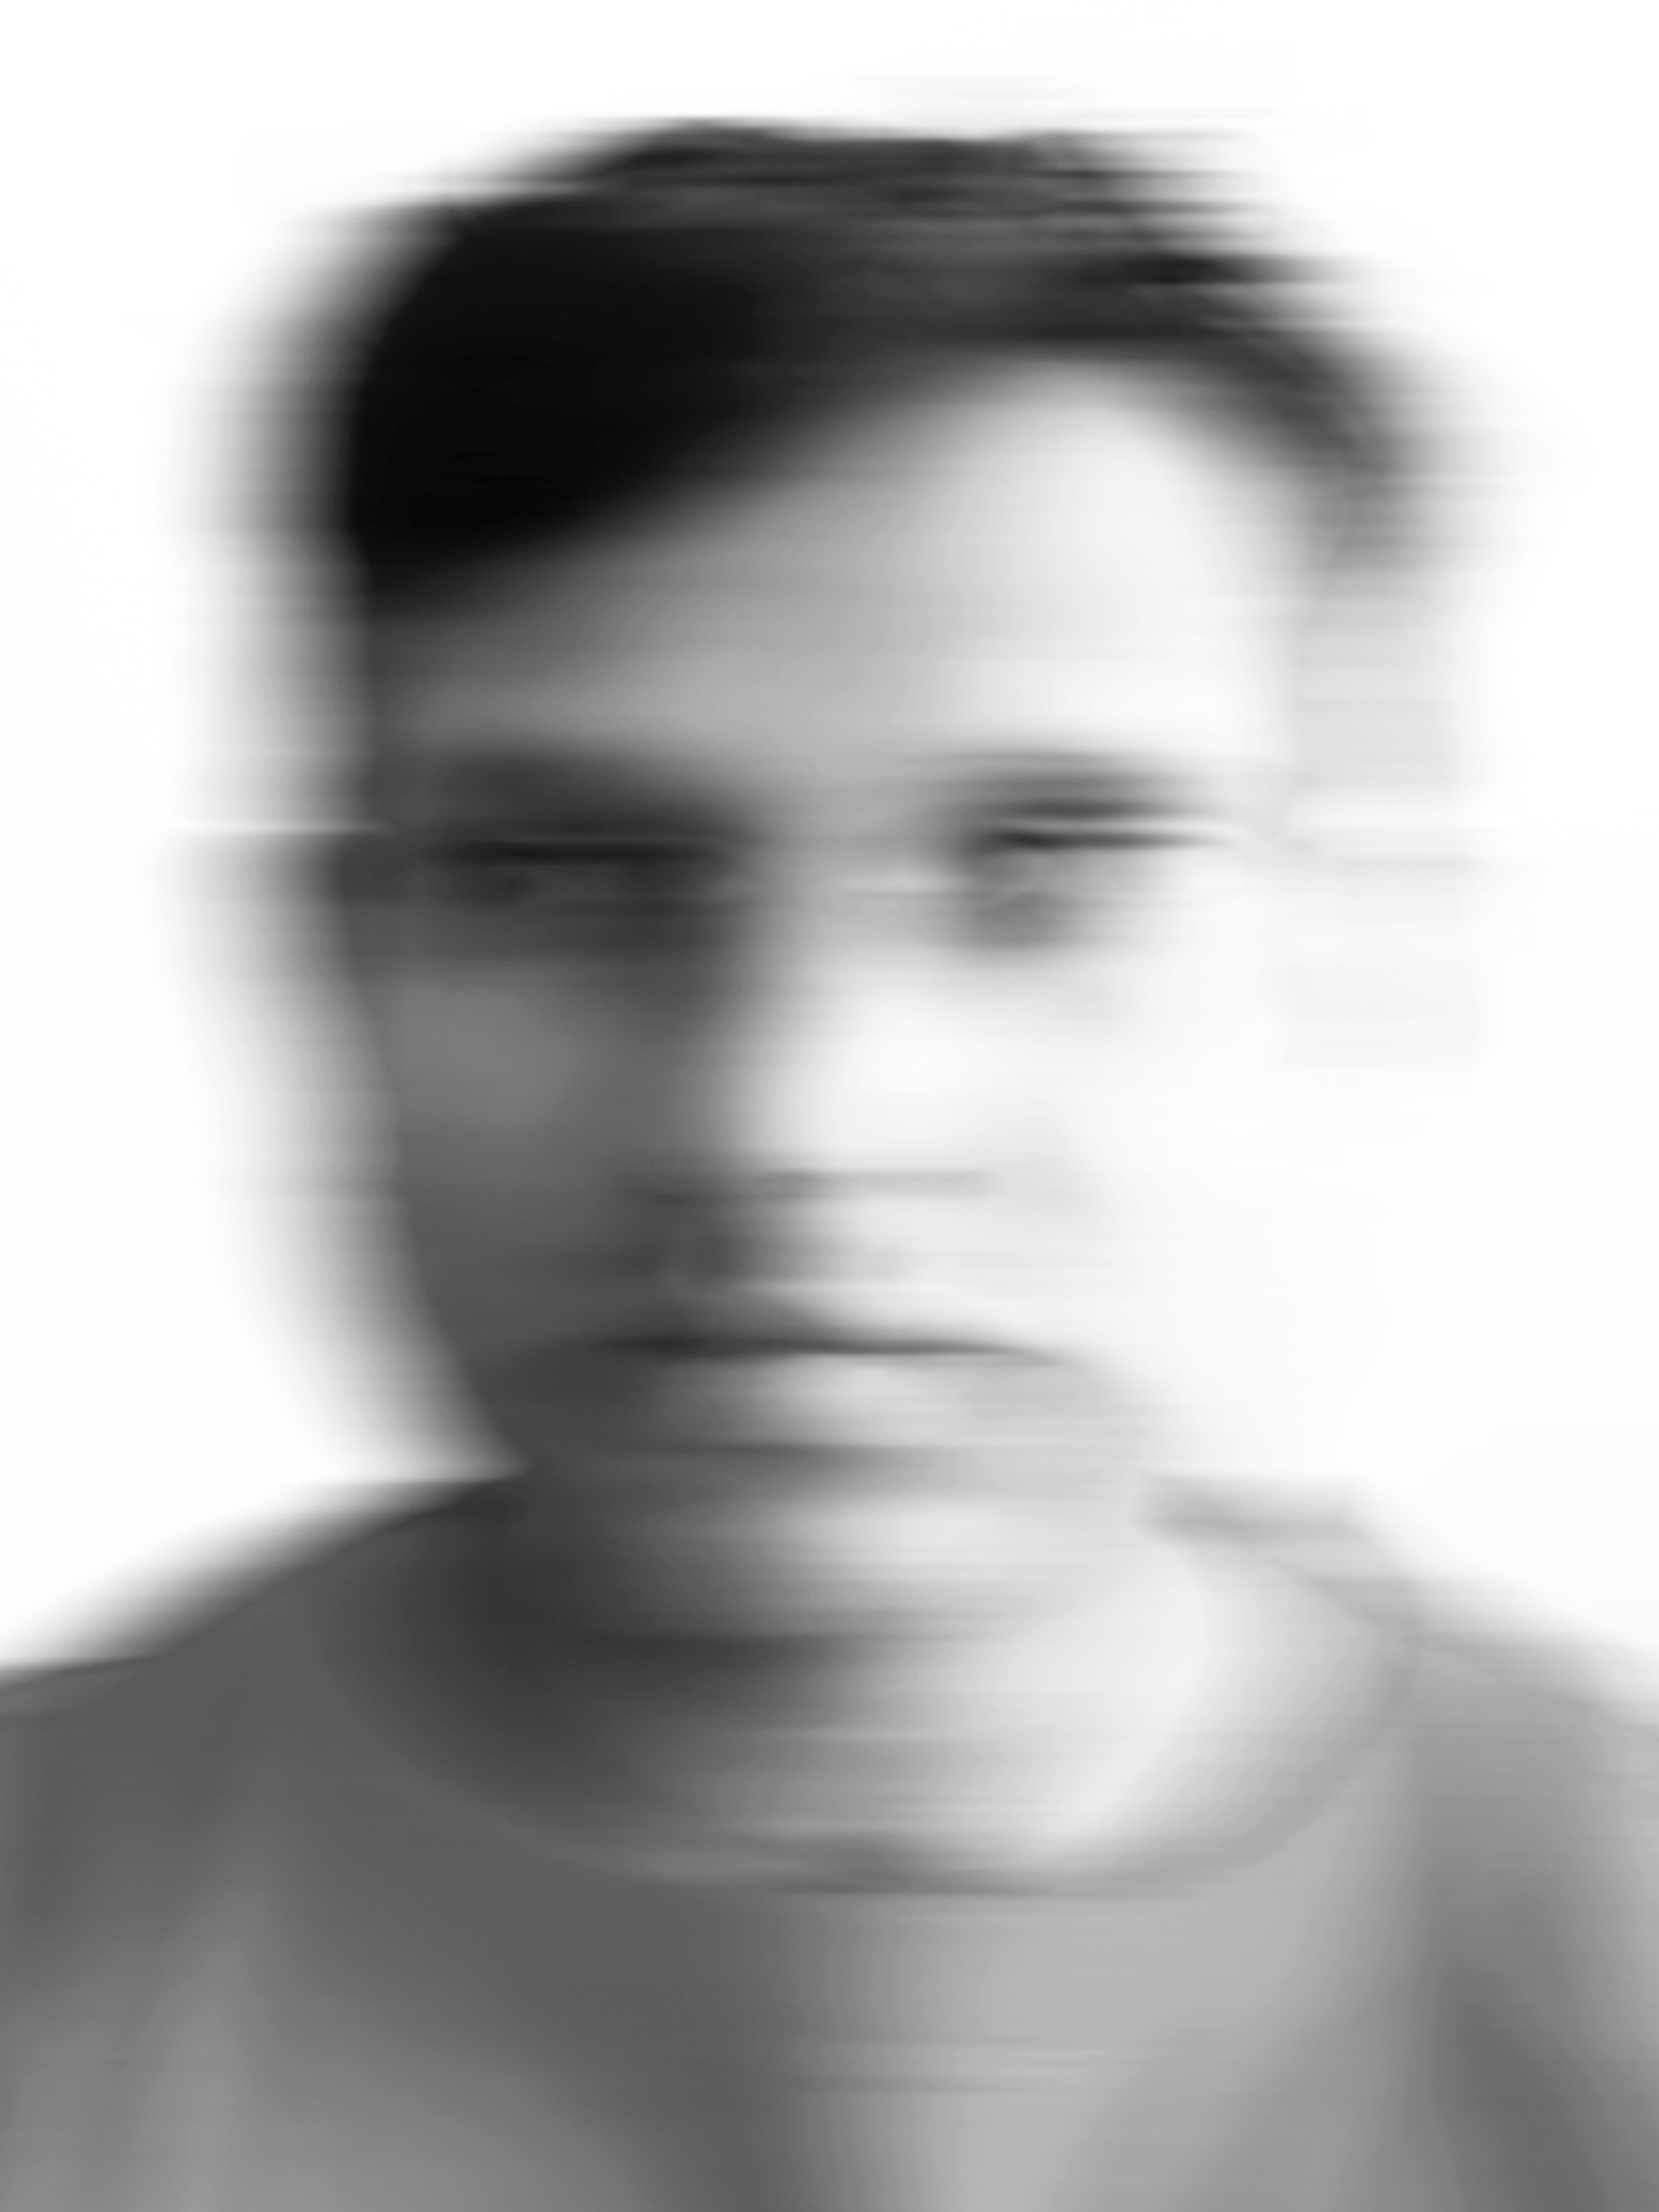 A blurry black and white portrait of a man